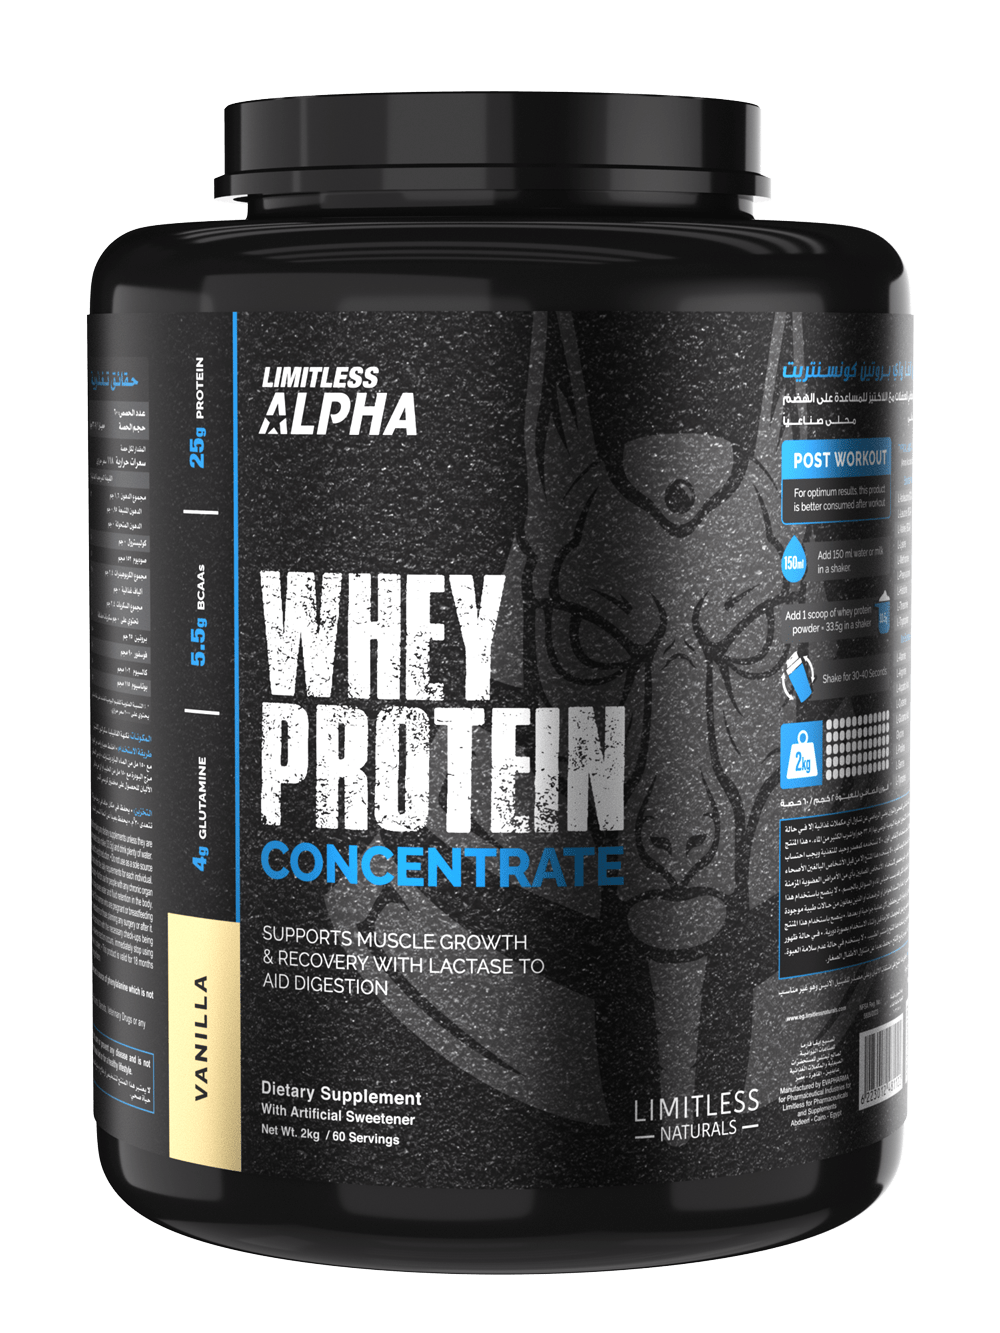 Are All Whey Proteins The Same? No WHEY!